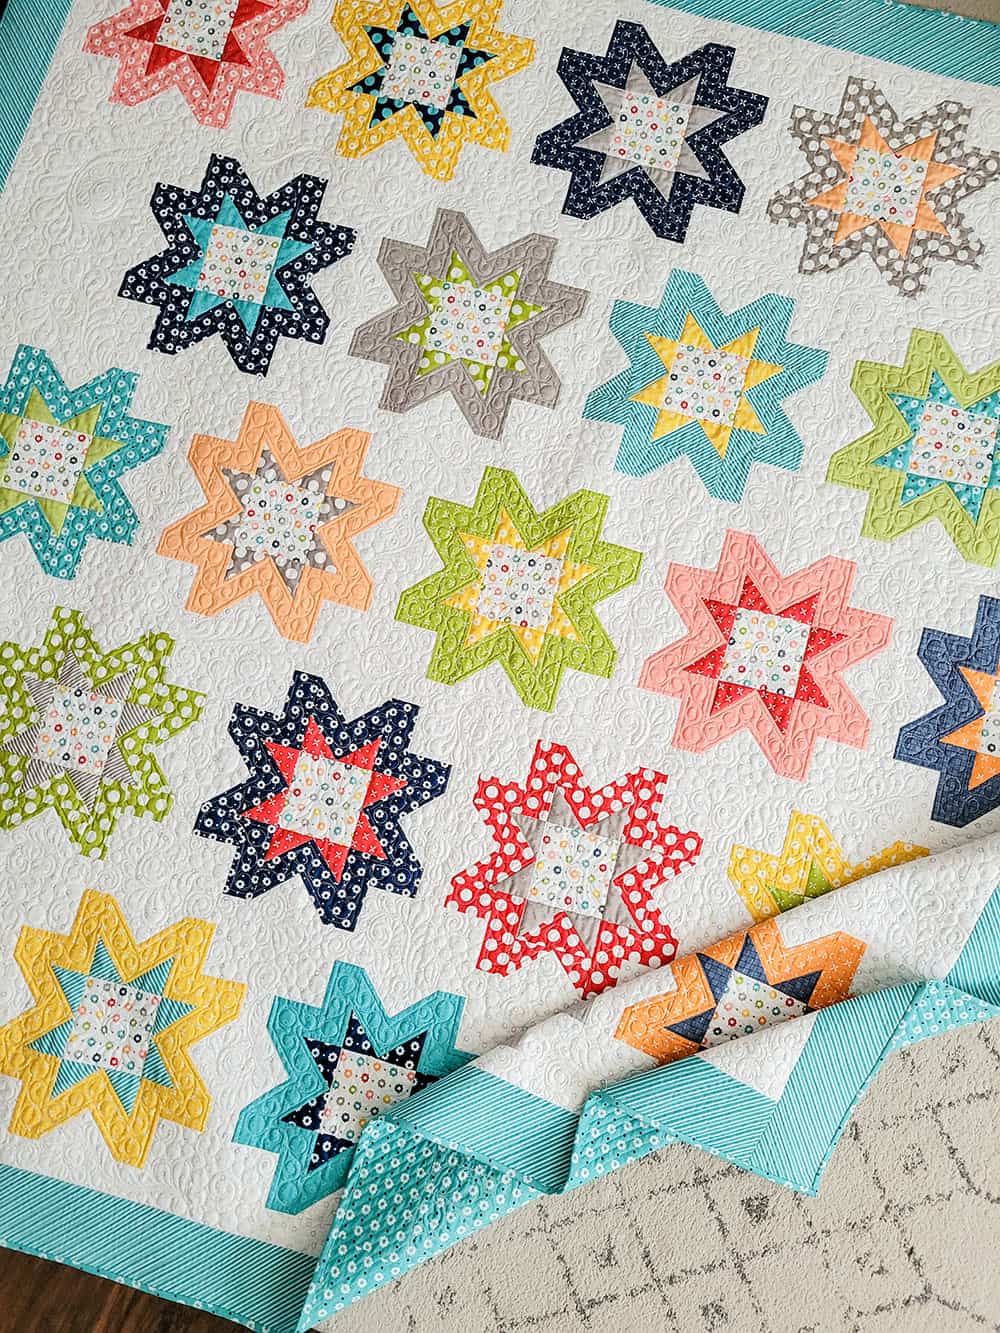 Quilting Life Podcast Episode 62 Show Notes featured by Top US Quilt Blog: A Quilting Life. Image of quilts by Sherri McConnell